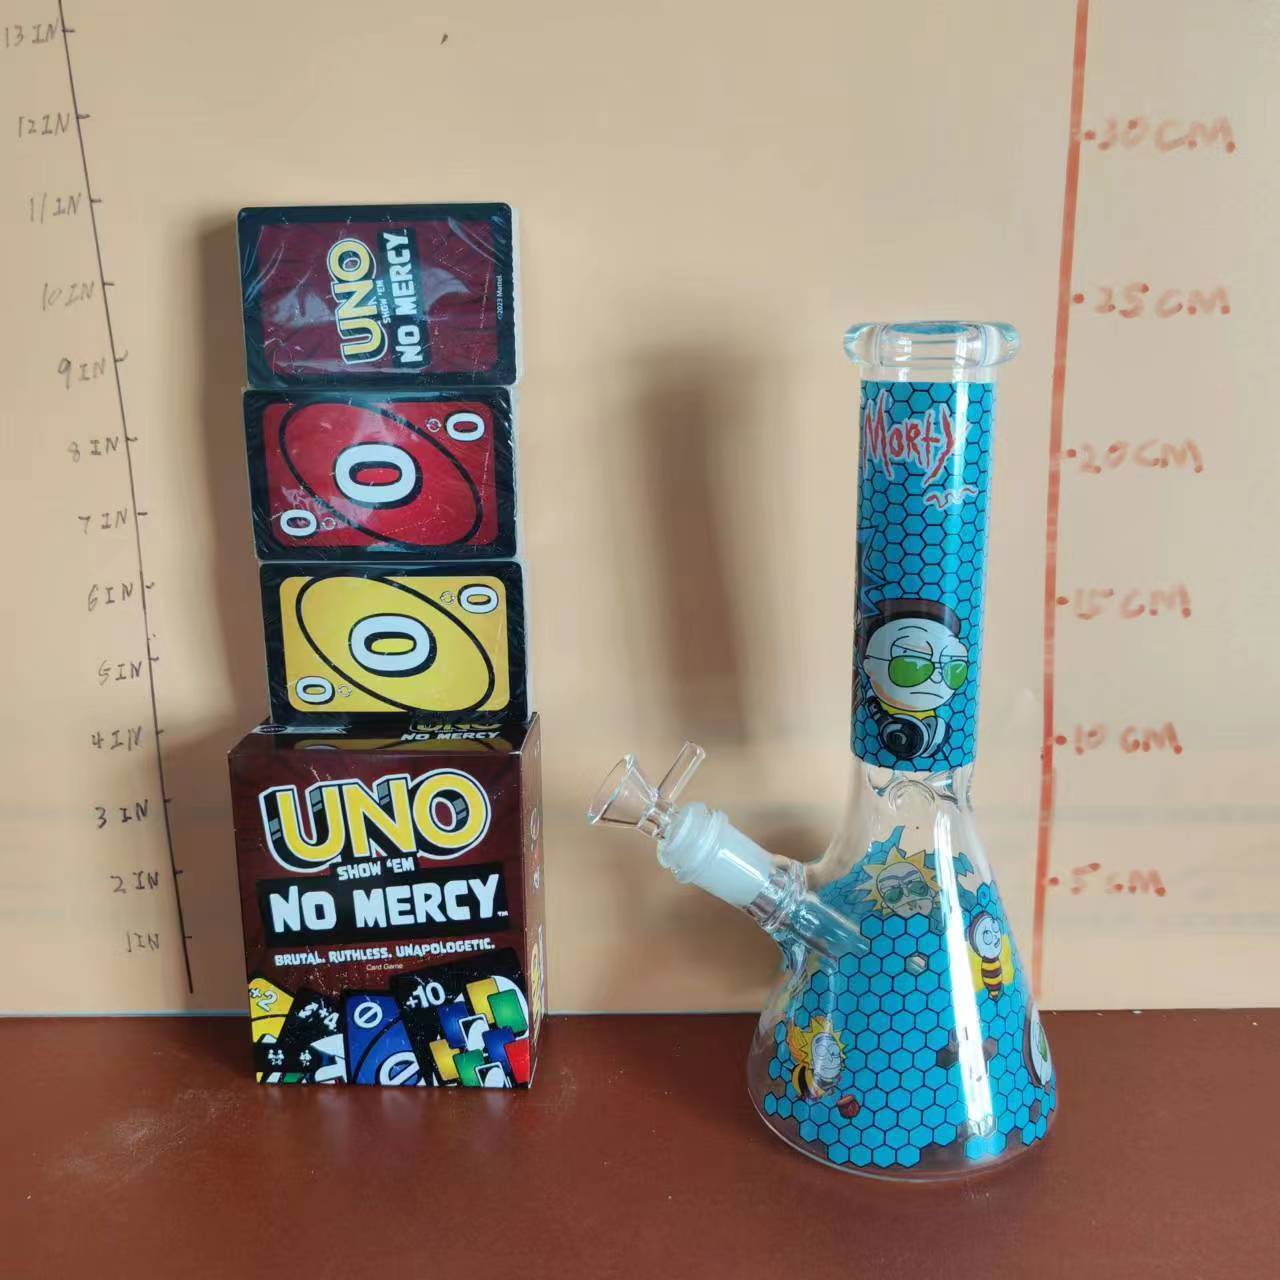 1X Uno No Mercy Card Game + 9in Handprint Heavy Beaker Water Pipe Bong Thick 